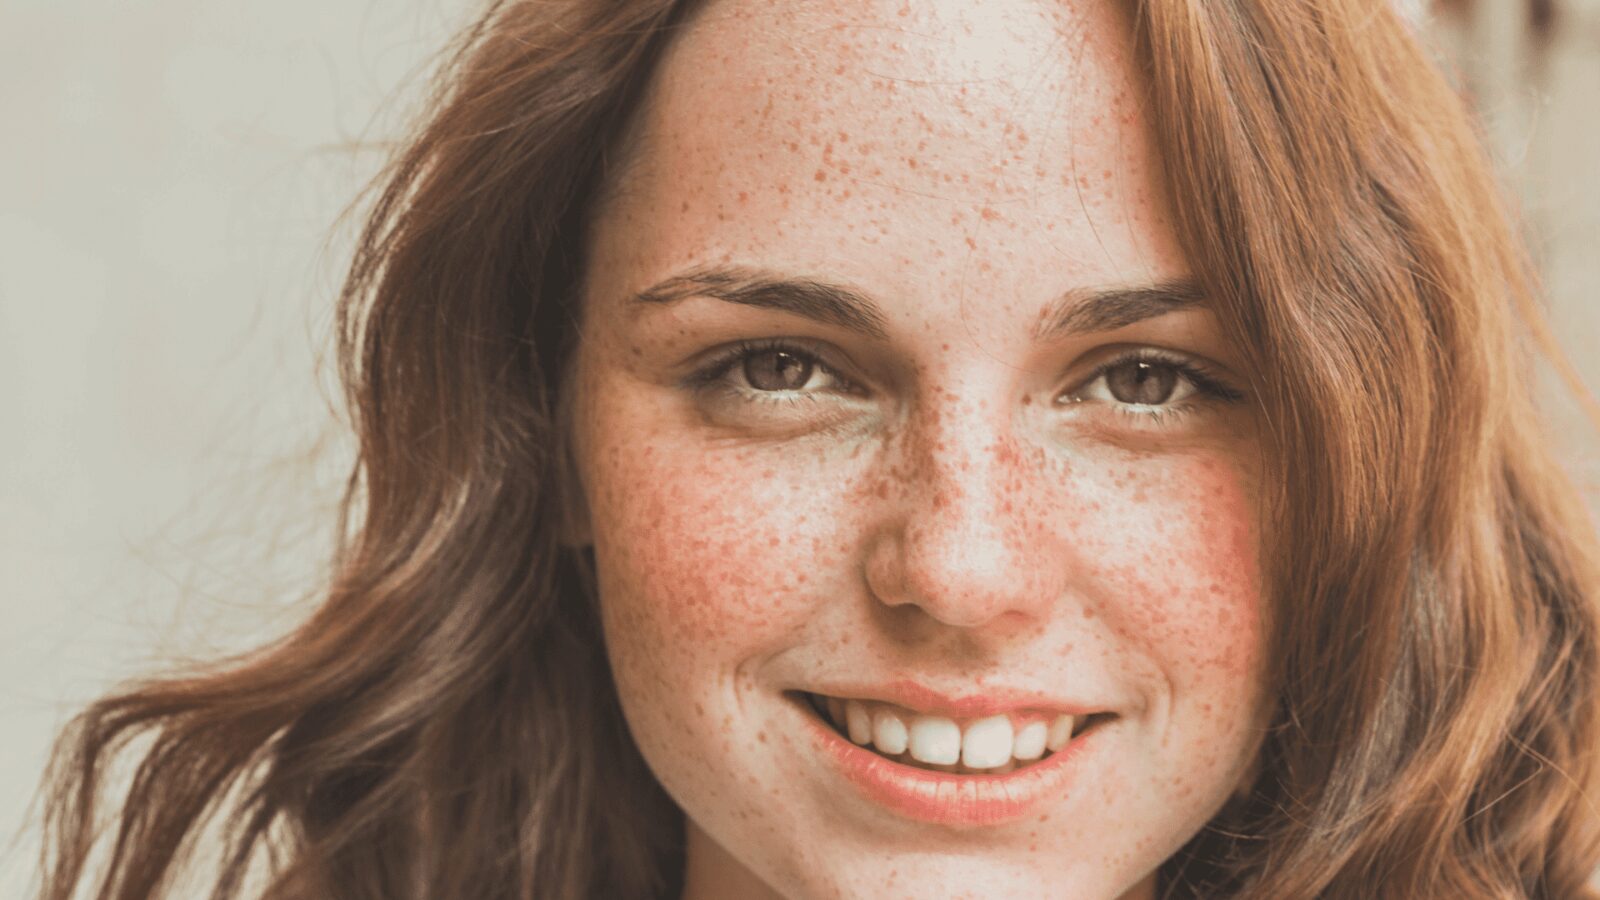 How to Get Freckles Without Damaging Your Redhead Skin